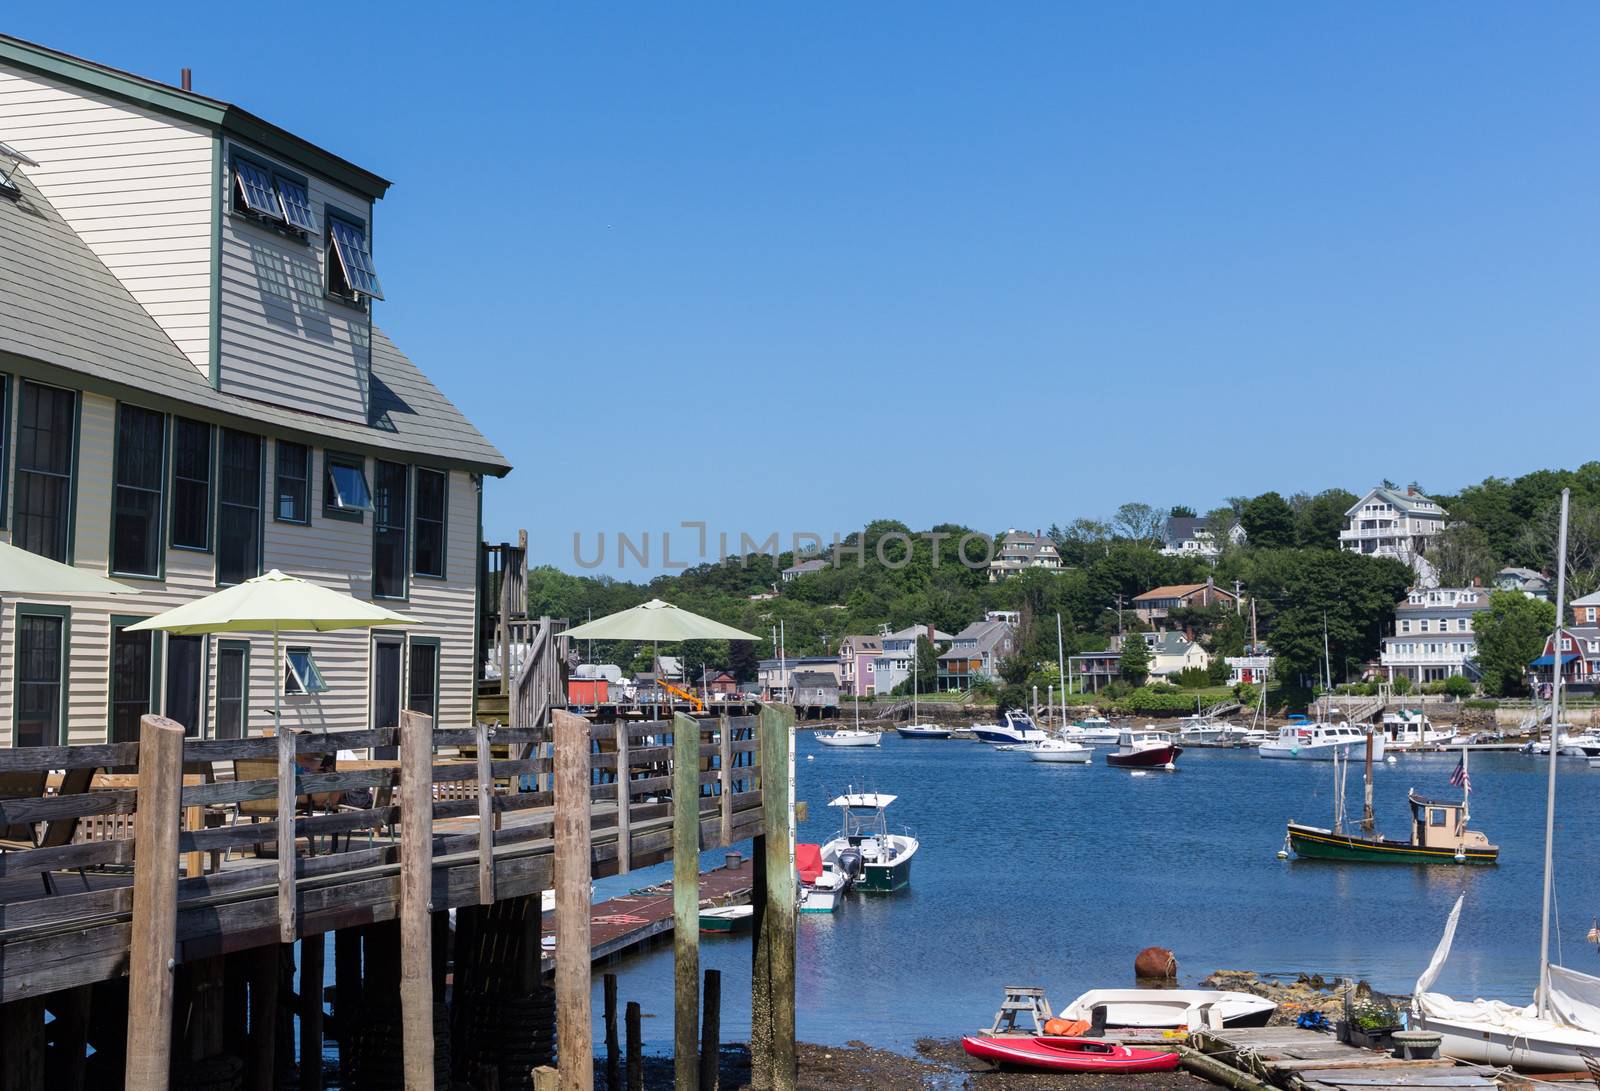 Tourist venues, homes, boats of all kinds are represented in this image of Rockport Harbor, MA